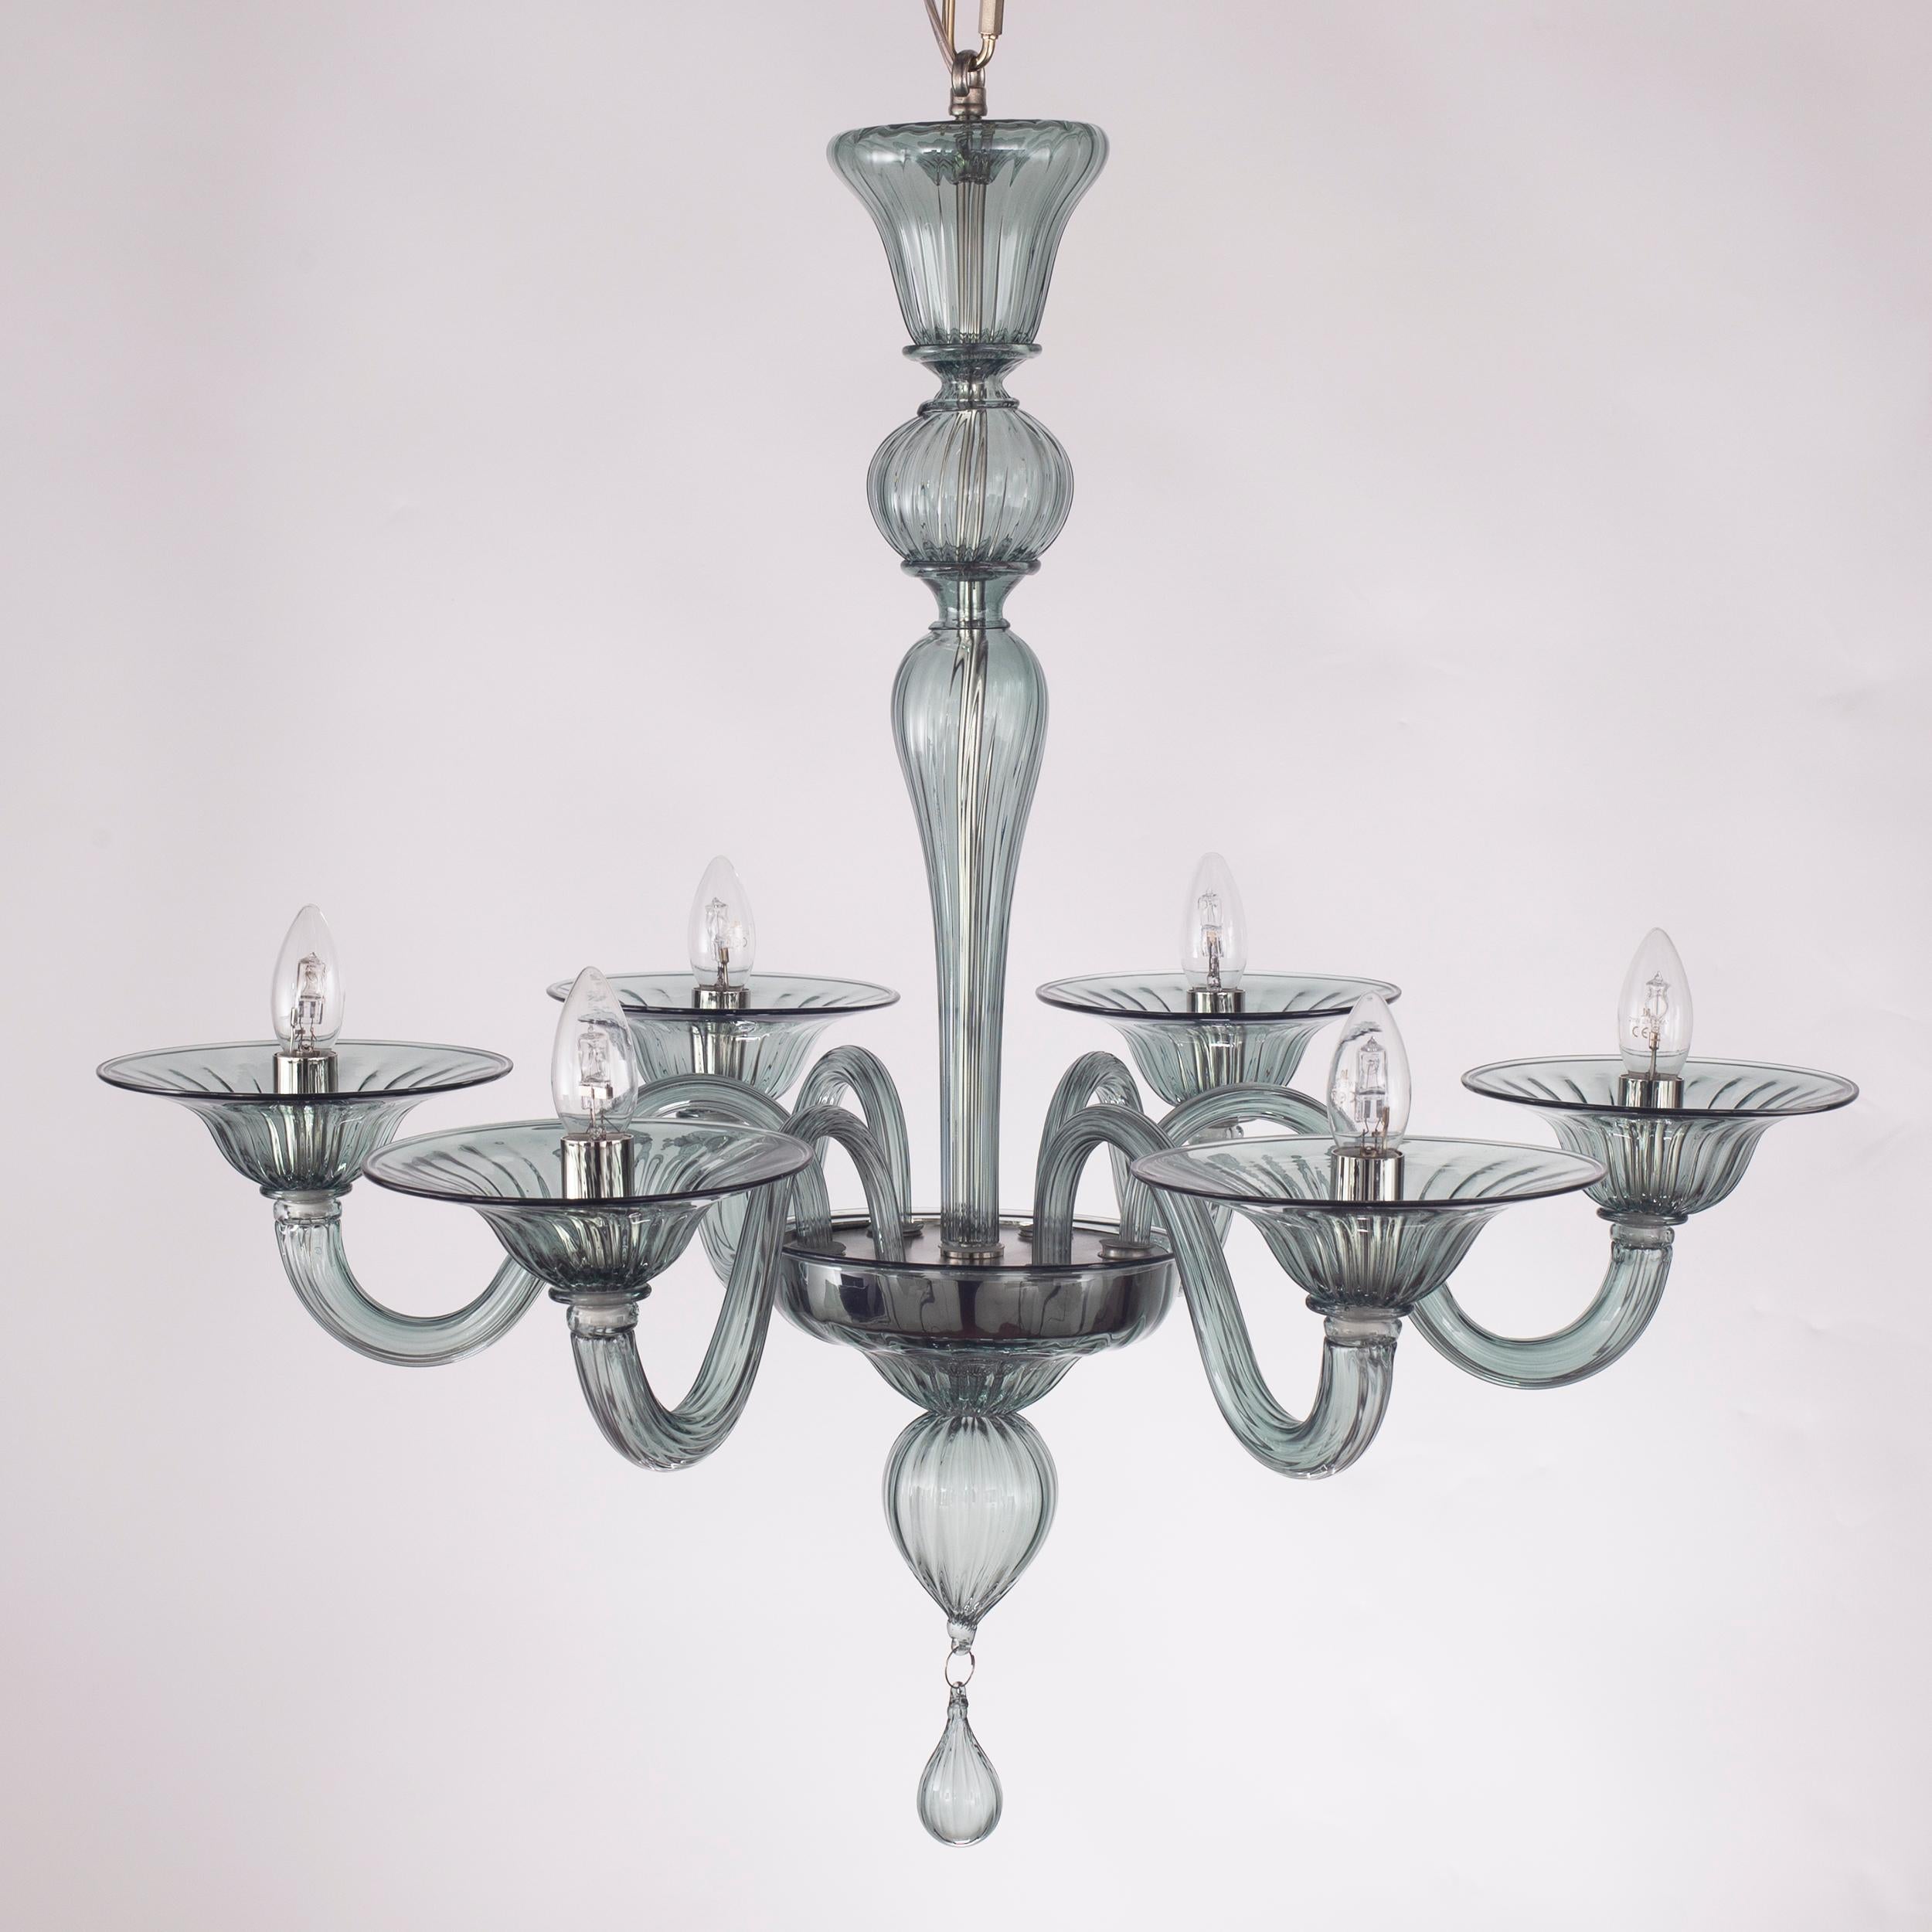 Simplicissimus 360 chandelier, 6 lights, grey green artistic glass by Multiforme
This collection in Murano glass is characterized by superb simplicity. It is the result of a research which harks back to the Classic Murano chandeliers with the